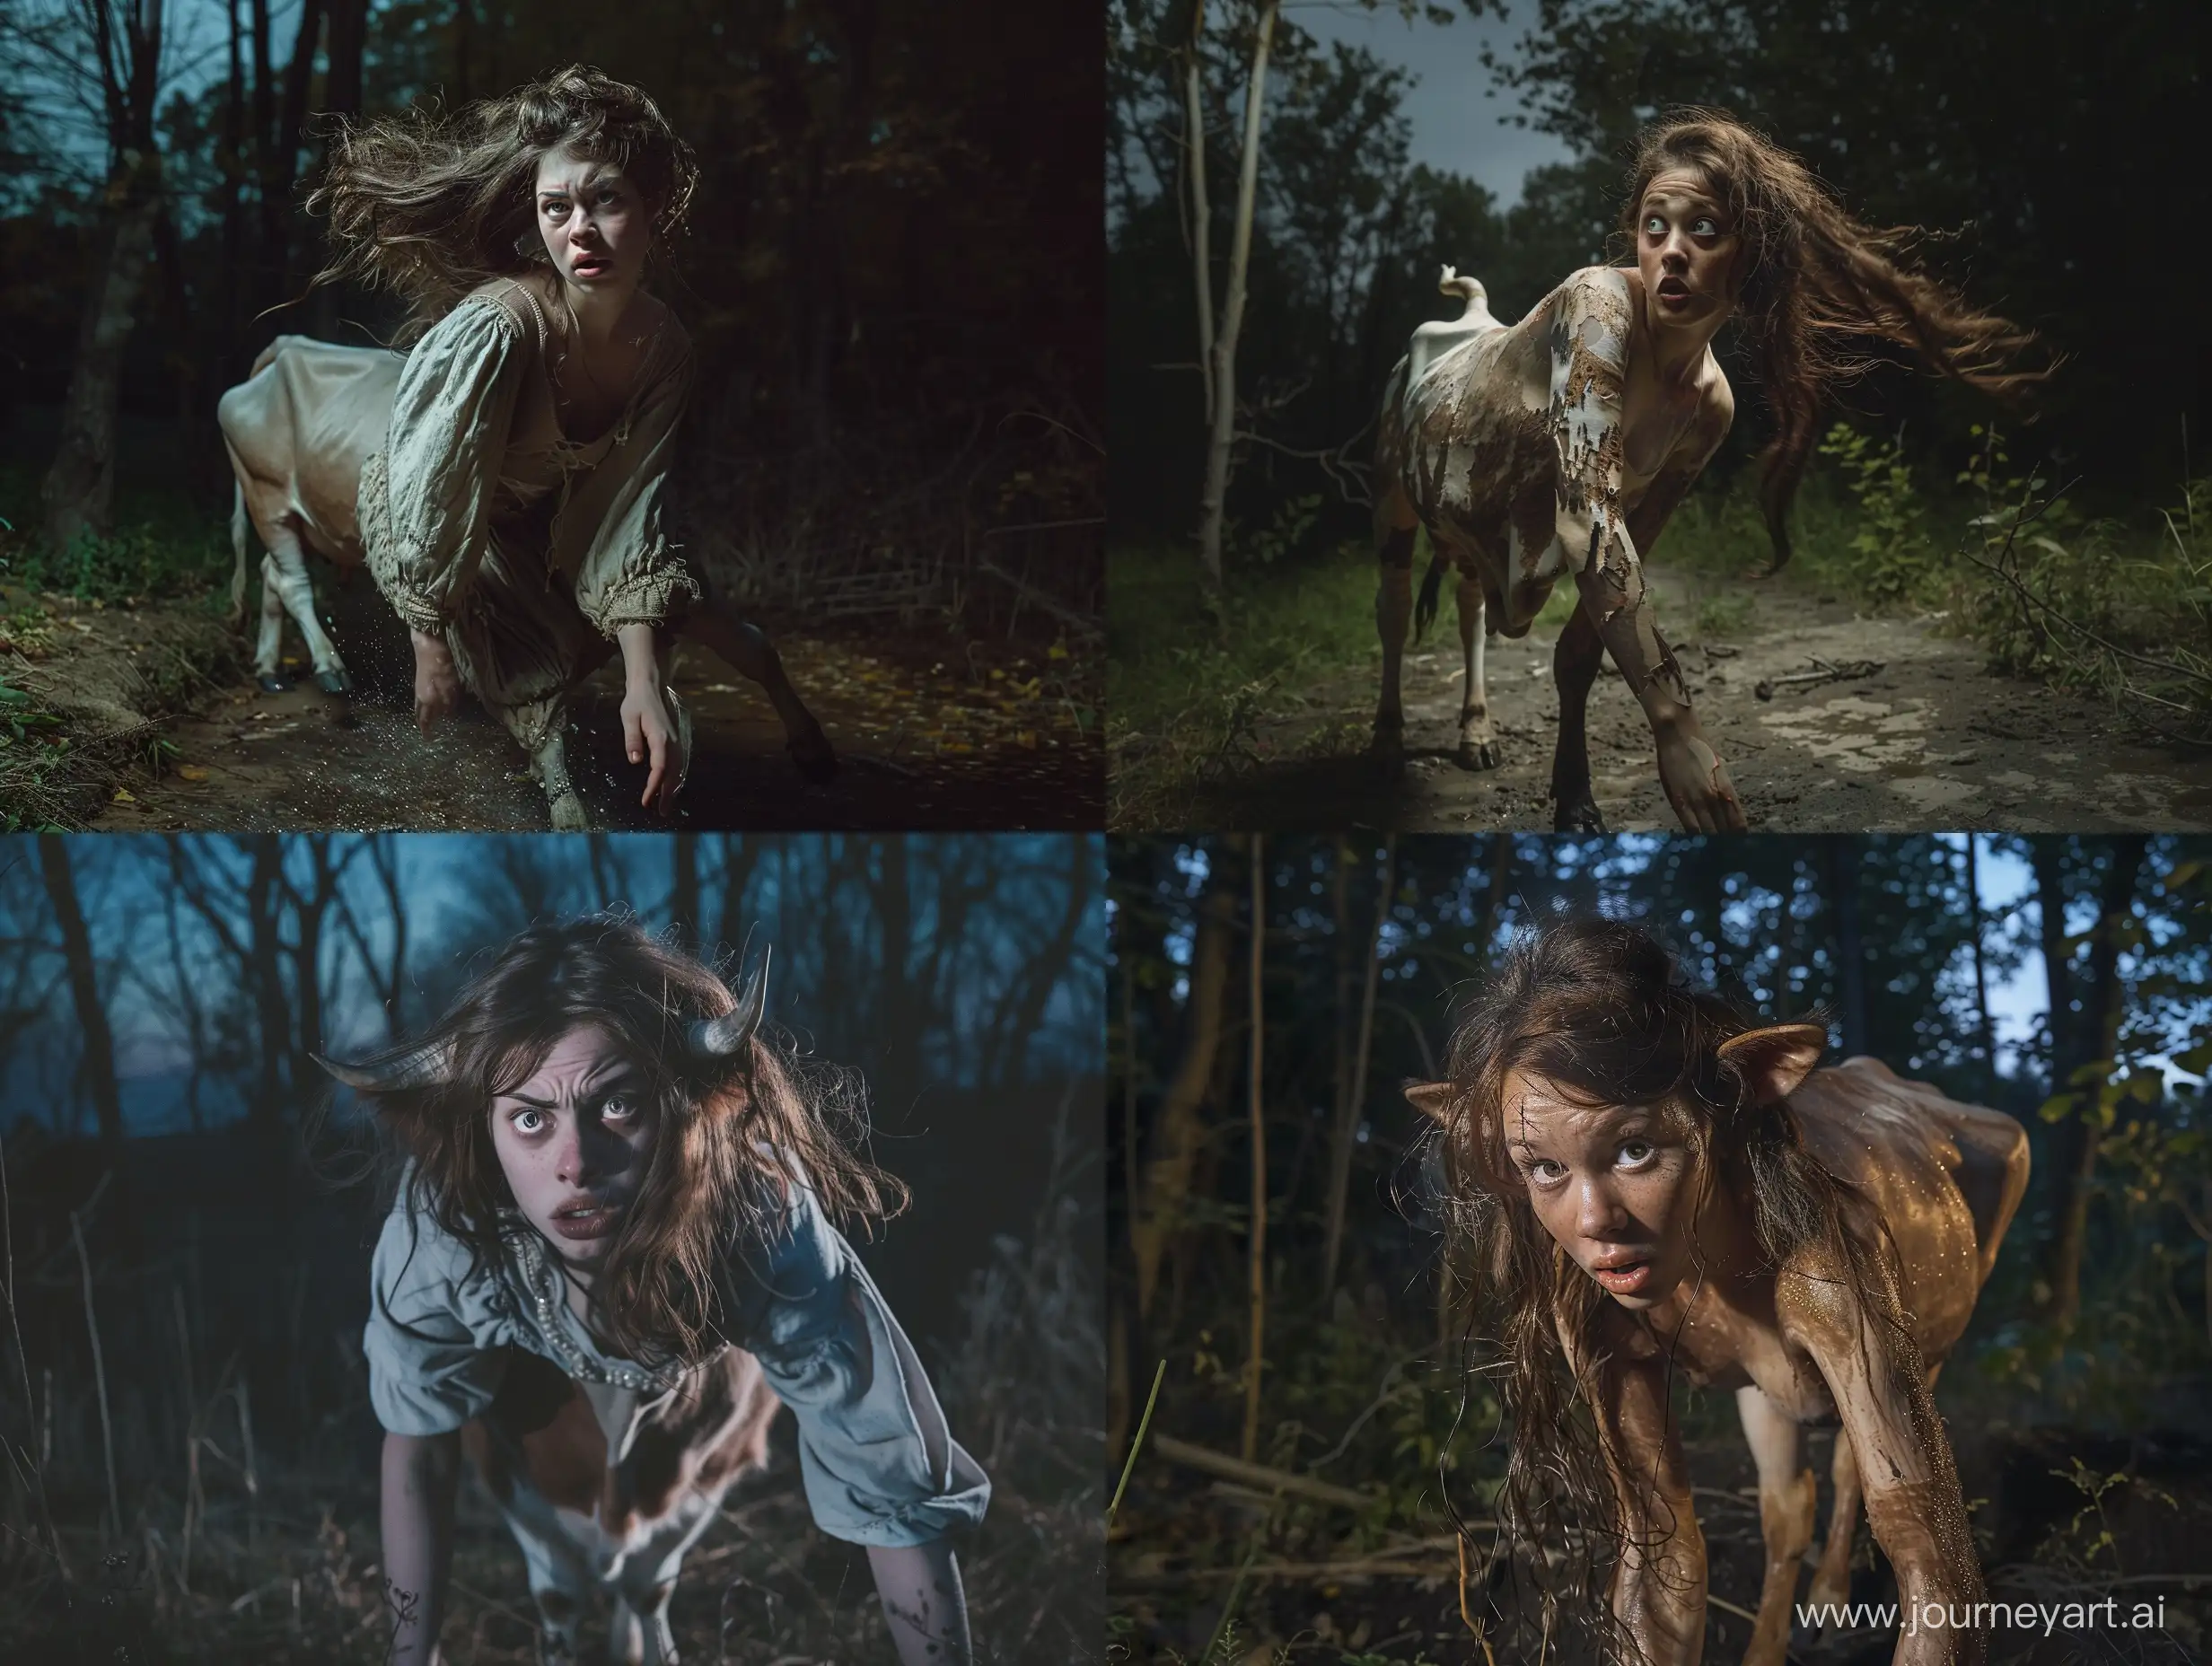 Desperate-Medieval-Princess-Transformation-BrownHaired-Cow-in-Night-Forest